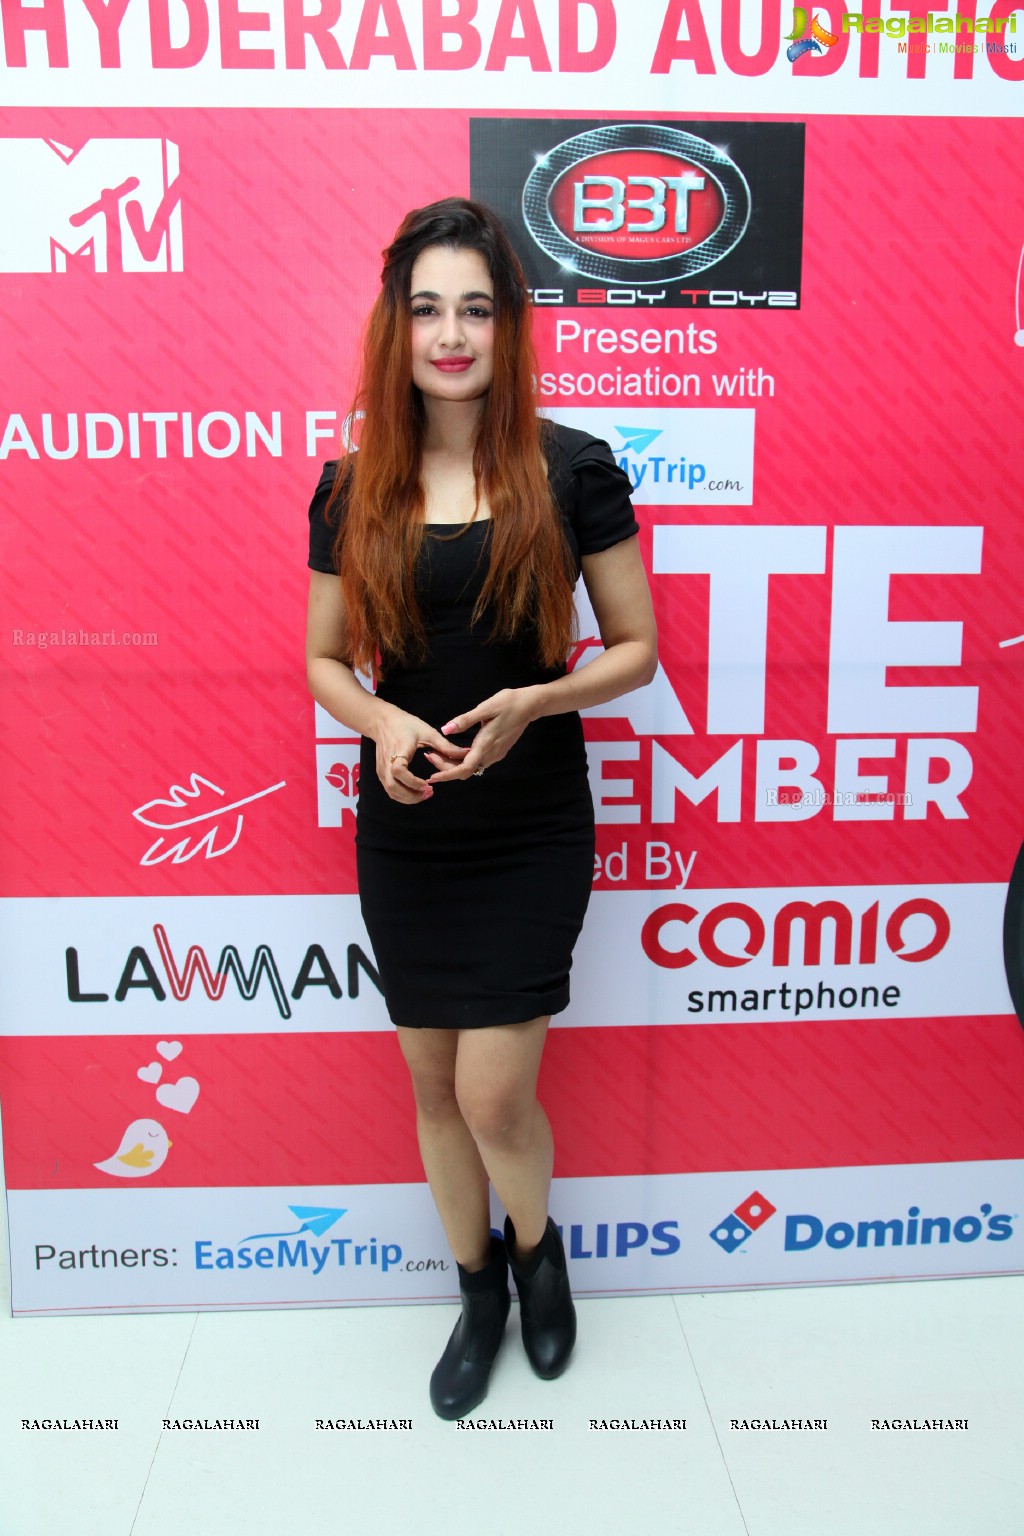 MTV 'A Date To Remember' Auditions at Podium Mall